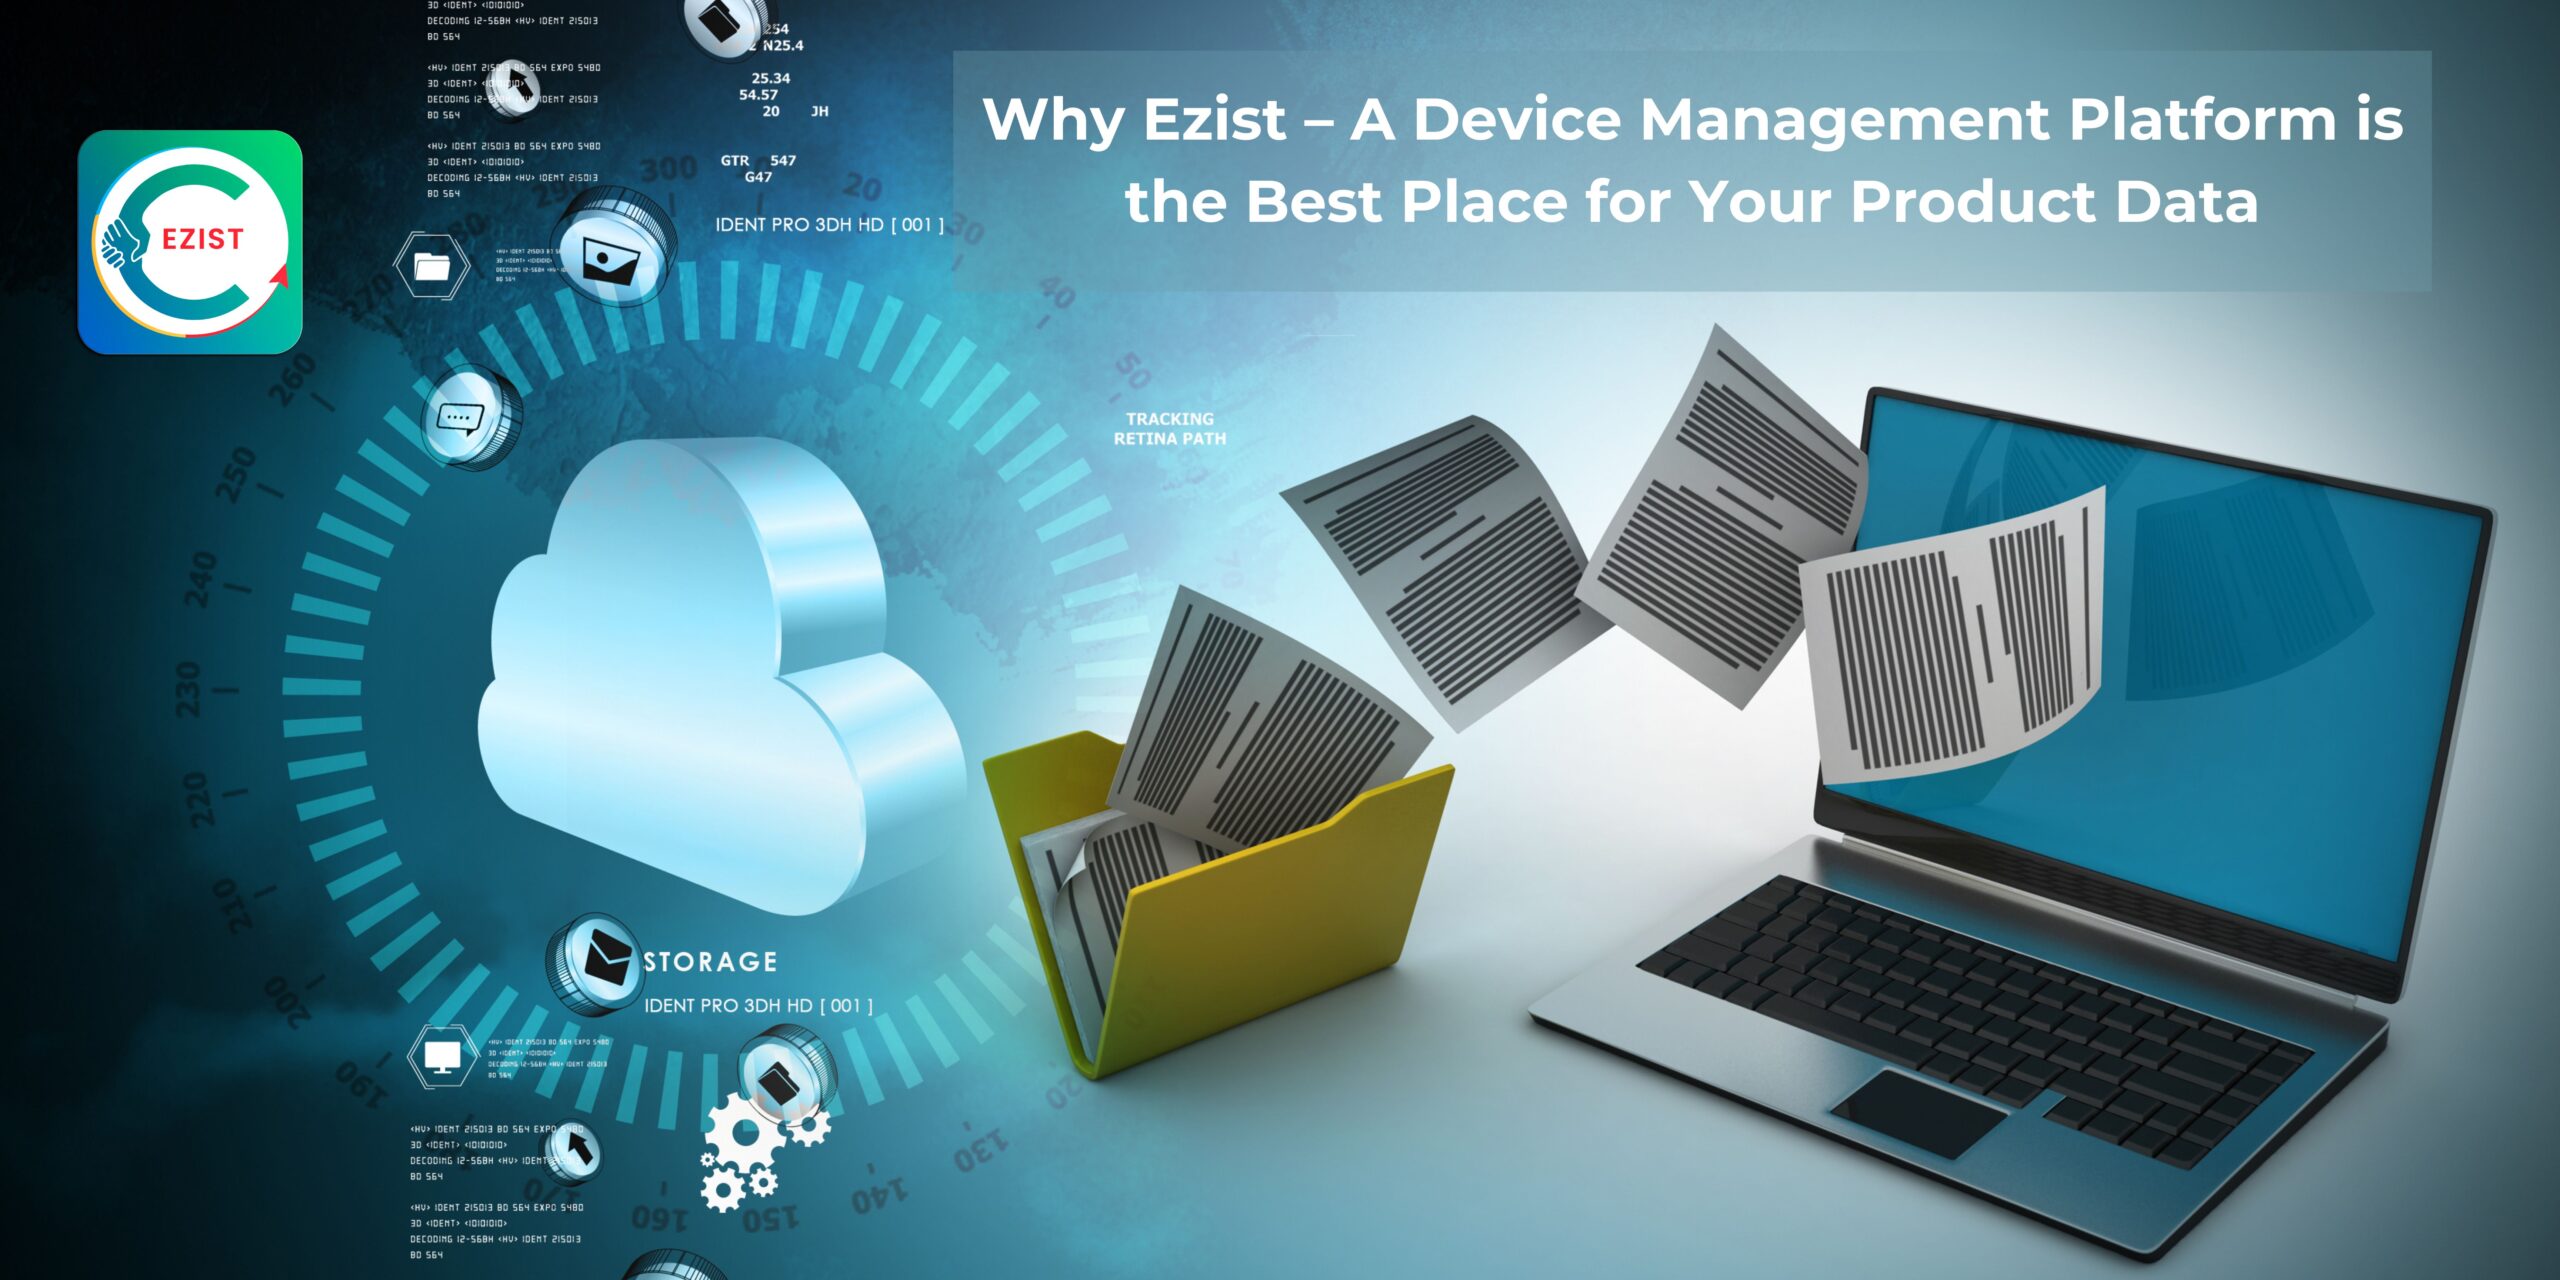 Managing our valuable devices' information and maintenance needs can be daunting in today's digital age. Each product requires meticulous attention to detail to ensure optimal performance and longevity, from smartphones to cars. Enter Ezist, the premier device management platform designed to simplify your life while keeping your data secure and accessible. What is a Device Management Platform? A device management platform like Ezist is a centralized hub for organizing, storing, and accessing crucial information about your devices. Whether it's smartphones, laptops, cars, or other valuable possessions, Ezist provides a comprehensive solution to manage their lifecycle effectively. Why Choose Ezist? 1. Centralized Information Hub: Ezist is a secure repository for product details, service history, and repair records. This centralized approach ensures instant access to essential information whenever you need it. 2. Automated Alerts and Updates: Never miss a warranty expiration or essential update again. Ezist sends automated alerts about warranty status, product recalls, and software updates directly to your device management platform account. 3. Enhanced Security: Your data's safety is paramount. Ezist employs robust encryption protocols to safeguard your information, ensuring it remains confidential and protected from unauthorized access. 4. Streamlined Service Requests: Need assistance? Ezist allows you to create service requests effortlessly, provides customer care information, and guides you through resolving any issues with your devices. 5. Social Engagement and Insights: Connect with a community of users who share similar products and interests. Ezist facilitates interaction and knowledge-sharing, empowering you to gain deeper insights into your devices' functionalities and capabilities. 6. Manufacturer Communication: Receive direct updates from manufacturers regarding your devices. Ezist acts as a conduit for targeted communications, ensuring you're always informed about the latest features and developments. 7. Operational Efficiency for Manufacturers: For manufacturers, Ezist offers invaluable insights into customer behavior and preferences. This data-driven approach helps manufacturers optimize operations and enhance customer satisfaction, boosting brand visibility and sales. 8. Service Provider Integration: Service providers benefit from Ezist's platform by improving response times, delivering quality services, and utilizing data analysis to enhance service efficiency across multiple locations. 9. Continuous Development: Ezist is committed to ongoing development, regularly rolling out new features to improve user experience and meet evolving needs in device management. 10. Mission-driven Approach: At Ezist, our mission is simple yet powerful: to empower users with universal access to information and services that maximize the value of their products. Whether managing a single device or multiple assets, Ezist is your trusted companion in ensuring seamless device management and enhanced user satisfaction. Get Started Today! Discover the ease and security of managing your devices with Ezist. Join thousands of satisfied users who rely on our device management platform to streamline their device management processes and stay informed. Experience the future of device management—secure, simple, and always reliable with Ezist. Visit Ezist today to learn more and embark on a journey towards effortless device management. Secure your data and simplify your life—choose Ezist. Ezist is now available in the Apple Store iOS version (https://apps.apple.com/us/app/ezist/id1536700481) and likely has a web interface accessible from any device and Any time with a web browser (https://platform.ezist.net/Login) Keep your sights sharp and your curiosity wide open! Explore more captivating reads with just one blink: Check out our curated collection of must-read blogs. • How Ezist Home Appliances Management Software Can Save You Time And Money • The Benefits Of Using A Receipt Management Solution For Your Business • Reducing Warranty Costs With Advanced Automotive Warranty Management Solutions • Ezist: Best Free Warranty Management Software Solution • Streamline Your Home Appliances with Automated Solutions • How Ezist the Automotive Management Platform is Changing the Industry • The Unexpected Benefits of Having A Car Management Platform: From Safety To Social Connection • Go Green: Embracing Paperless Receipts for Eco-Friendly Living • 5 Ways Appliance Organization Software Can Revolutionize Your Appliance Management